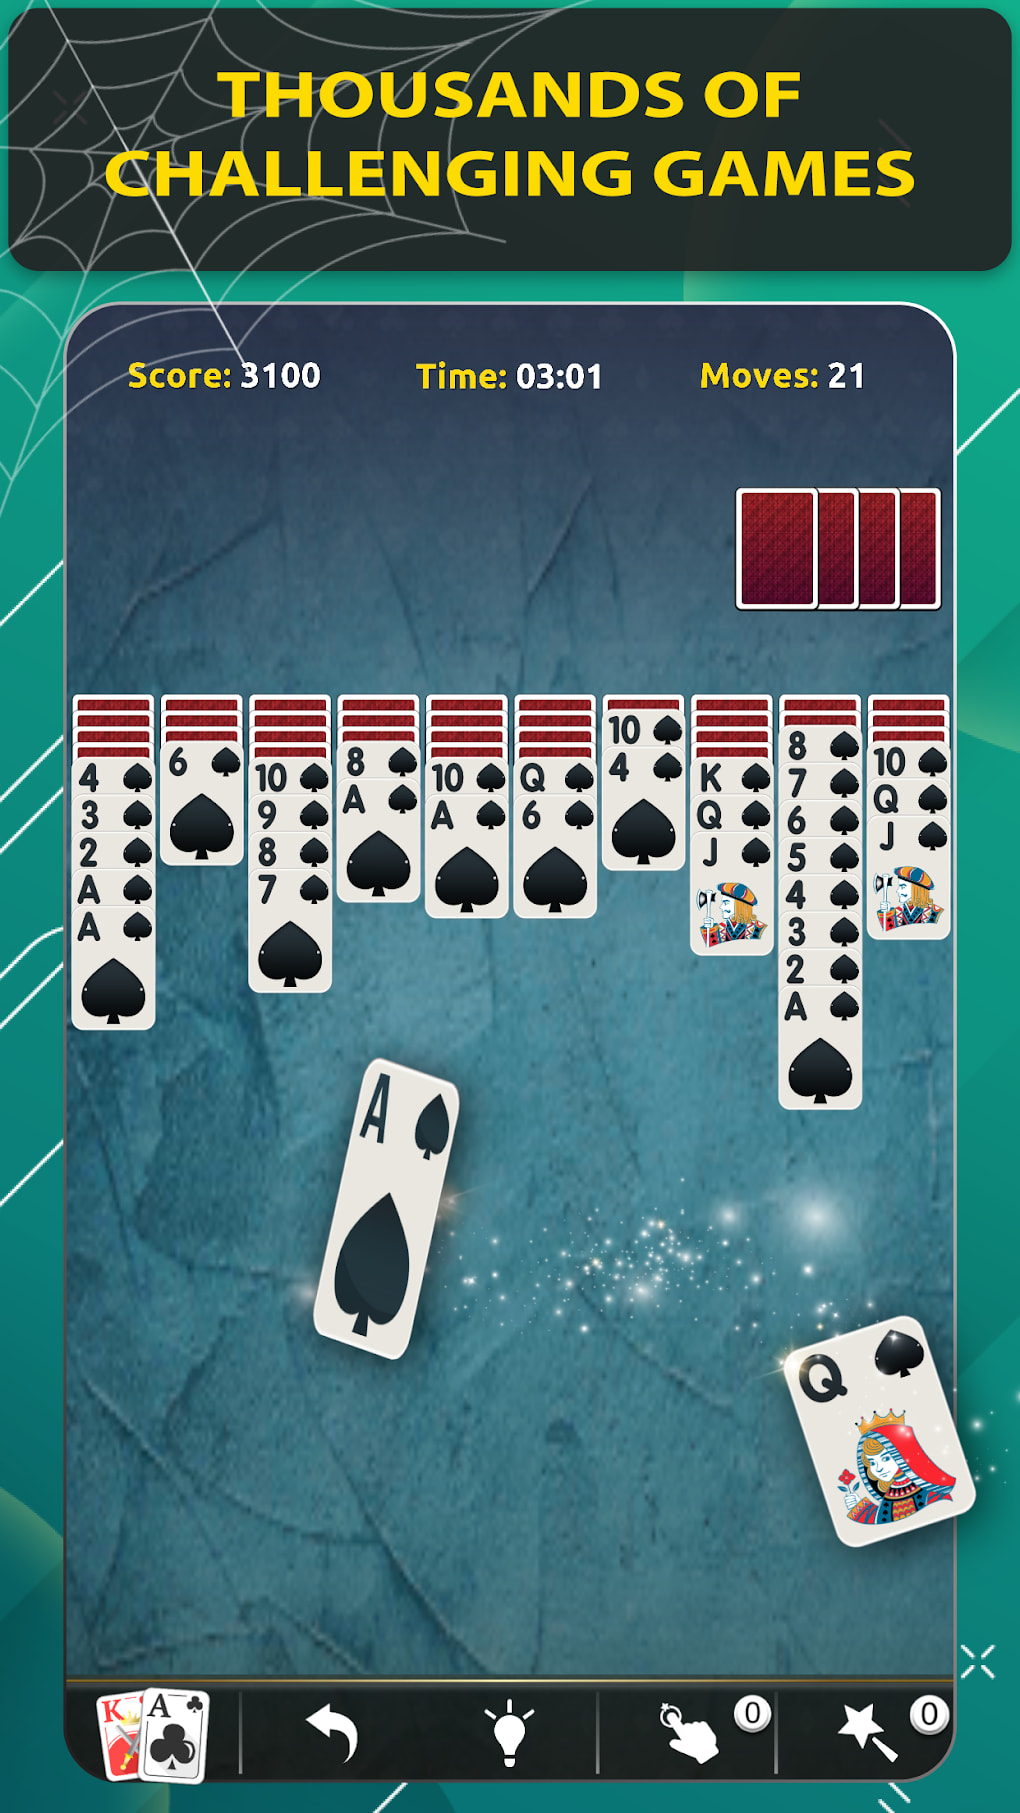 Spider Solitaire Classic APK for Android Download